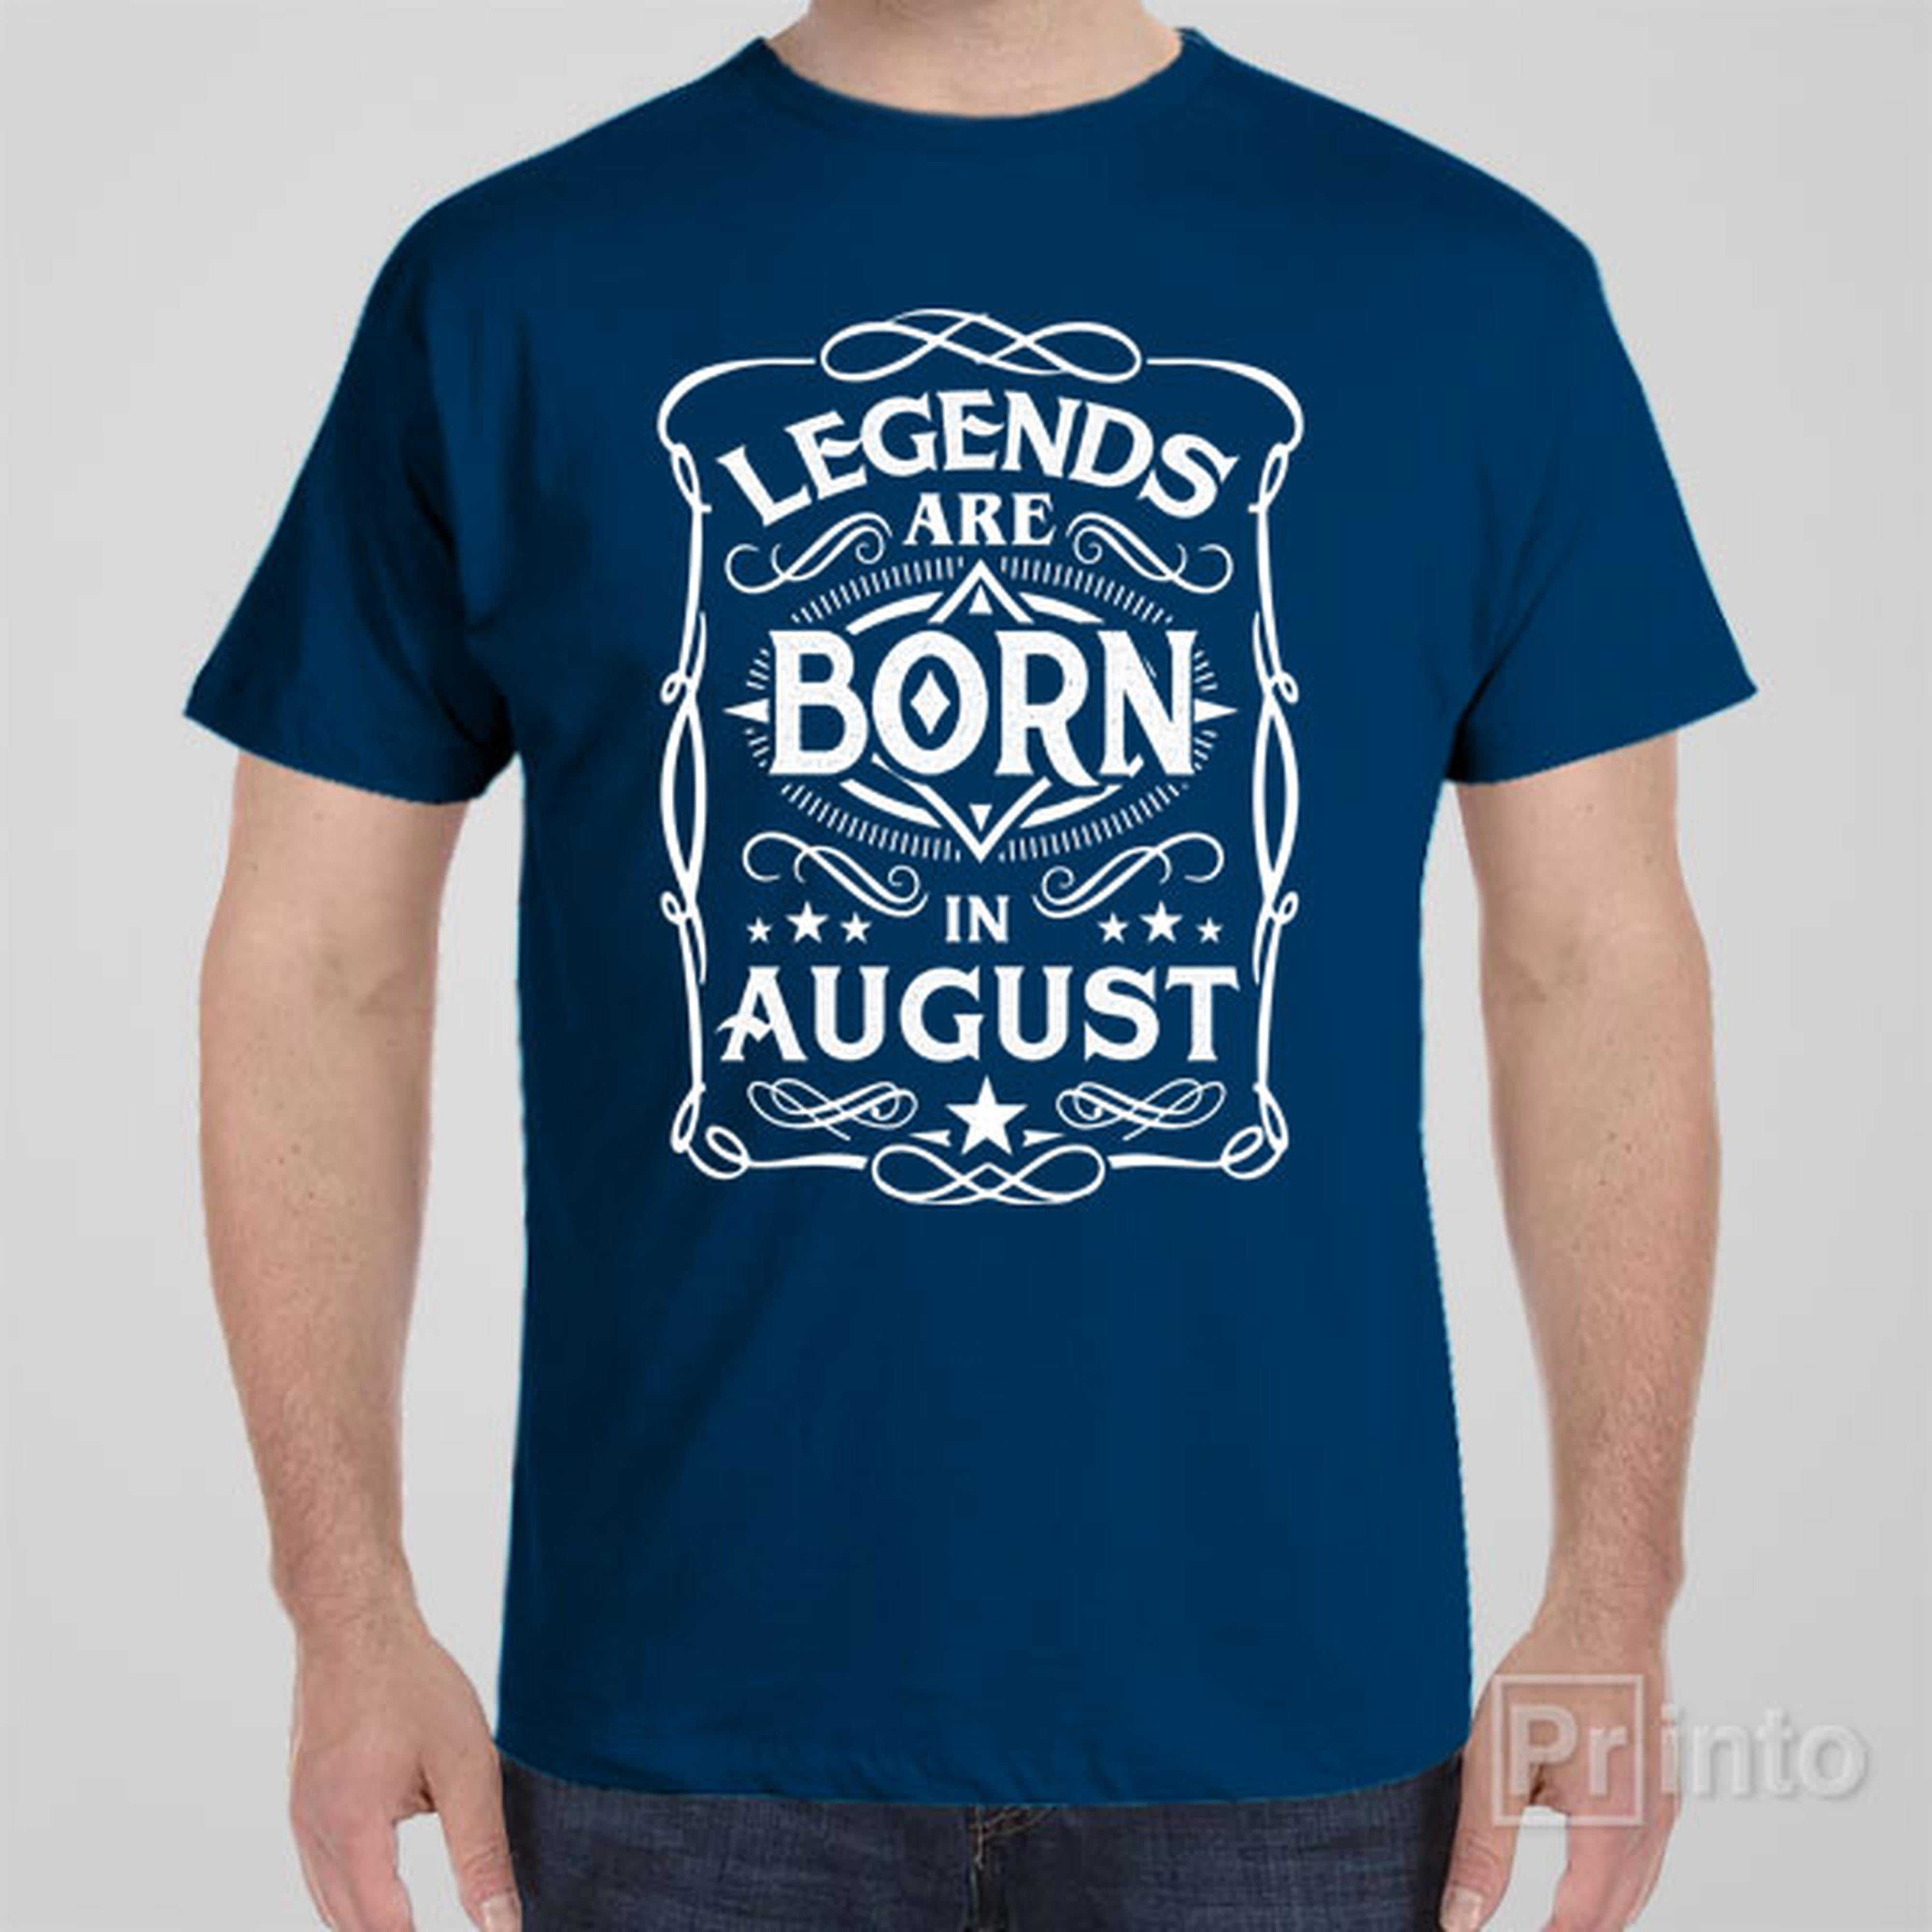 legends-are-born-in-august-t-shirt